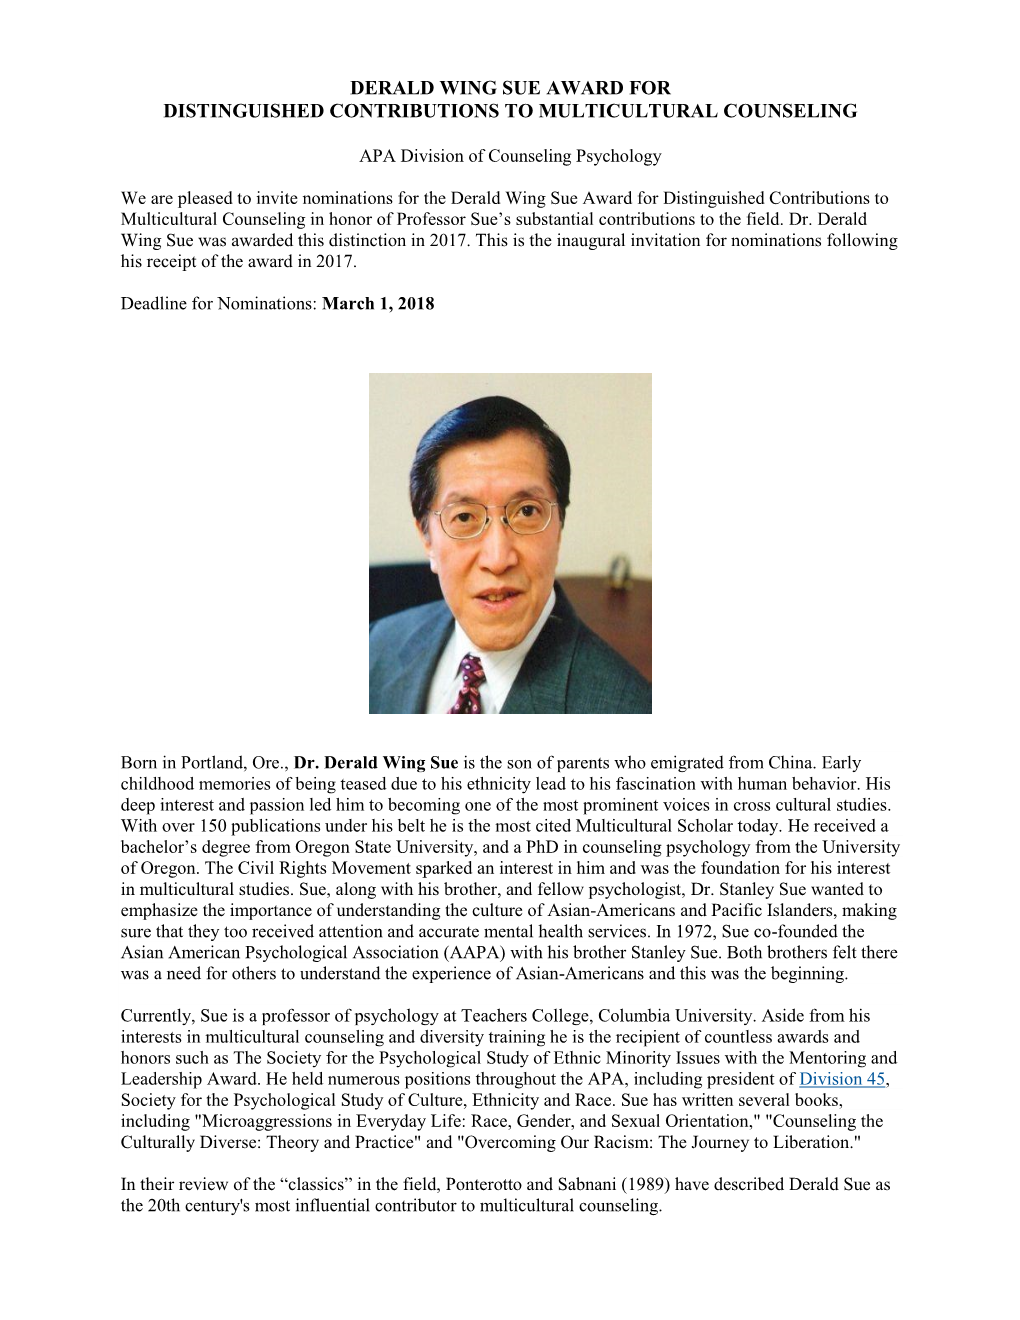 Derald Wing Sue Award for Distinguished Contributions to Multicultural Counseling